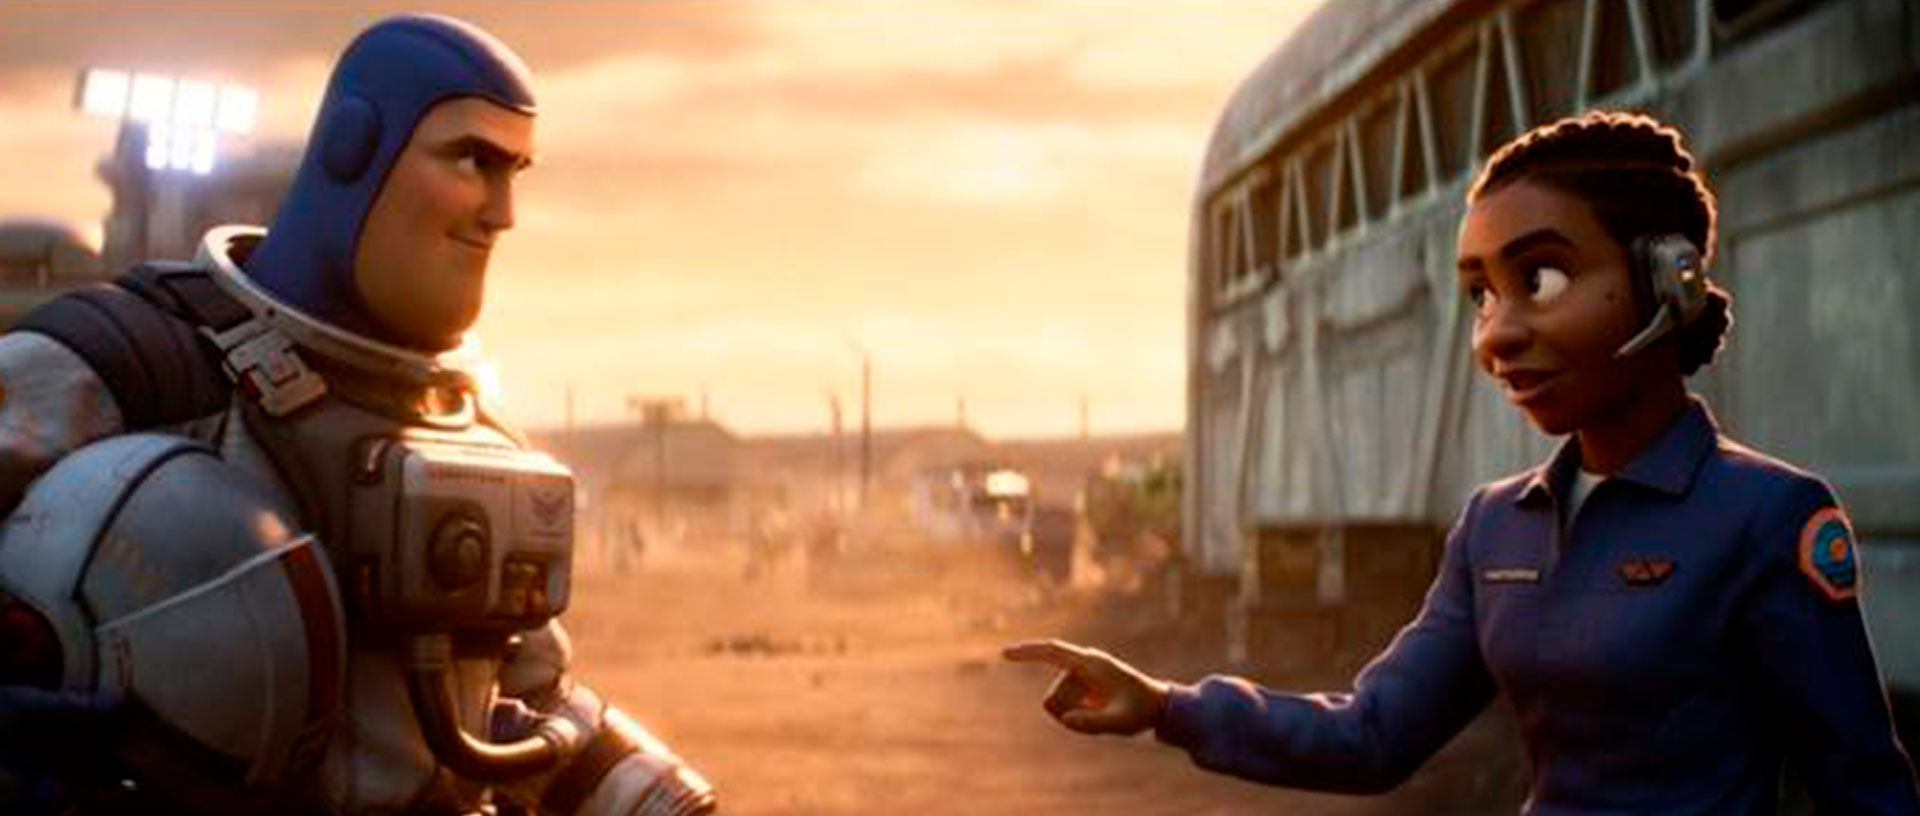 FILE - This image released by Disney/Pixar shows the character Buzz Lightyear, voiced by Chris Evans, at left, and Alisha Hawthorne, voiced by Uzo Aduba, in a scene from the animated film "Lightyear", which will be released on June 17.  (Disney/Pixar via AP, File)